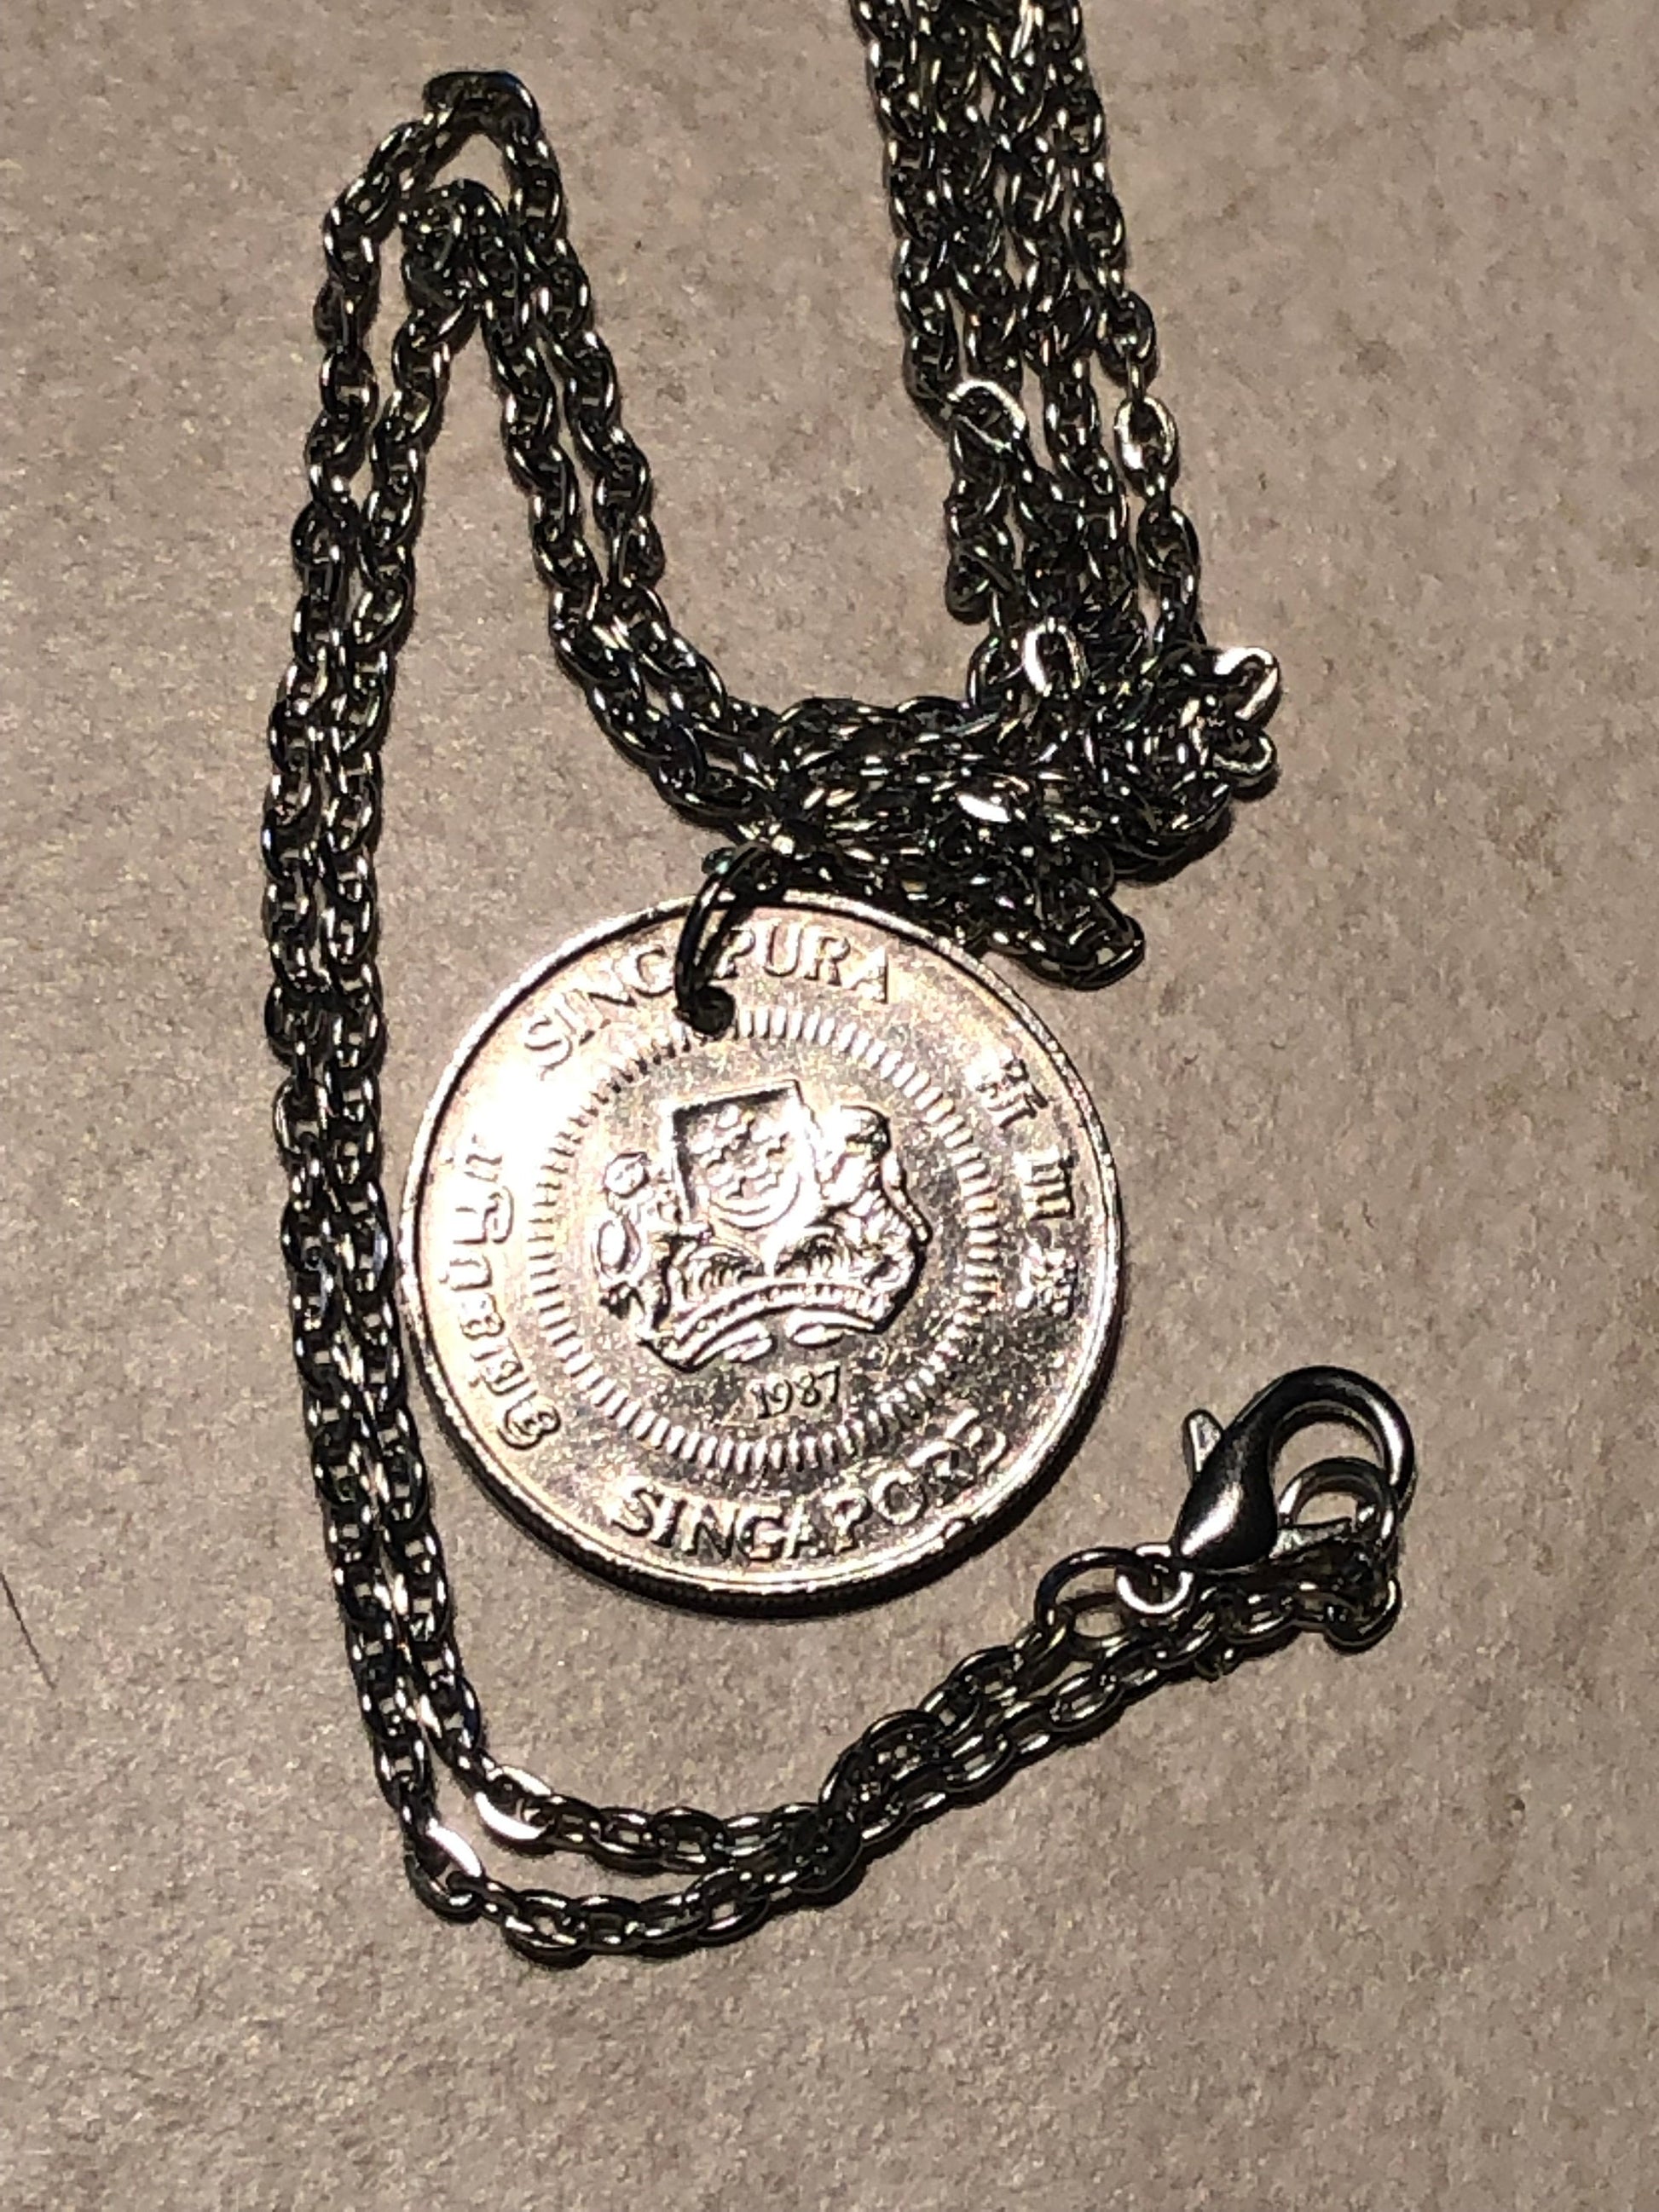 Singapore Hong Kong 50 Cent Coin Pendant Necklace Custom Rare coins - Vintage - Coin Enthusiast Fashion Accessory Made